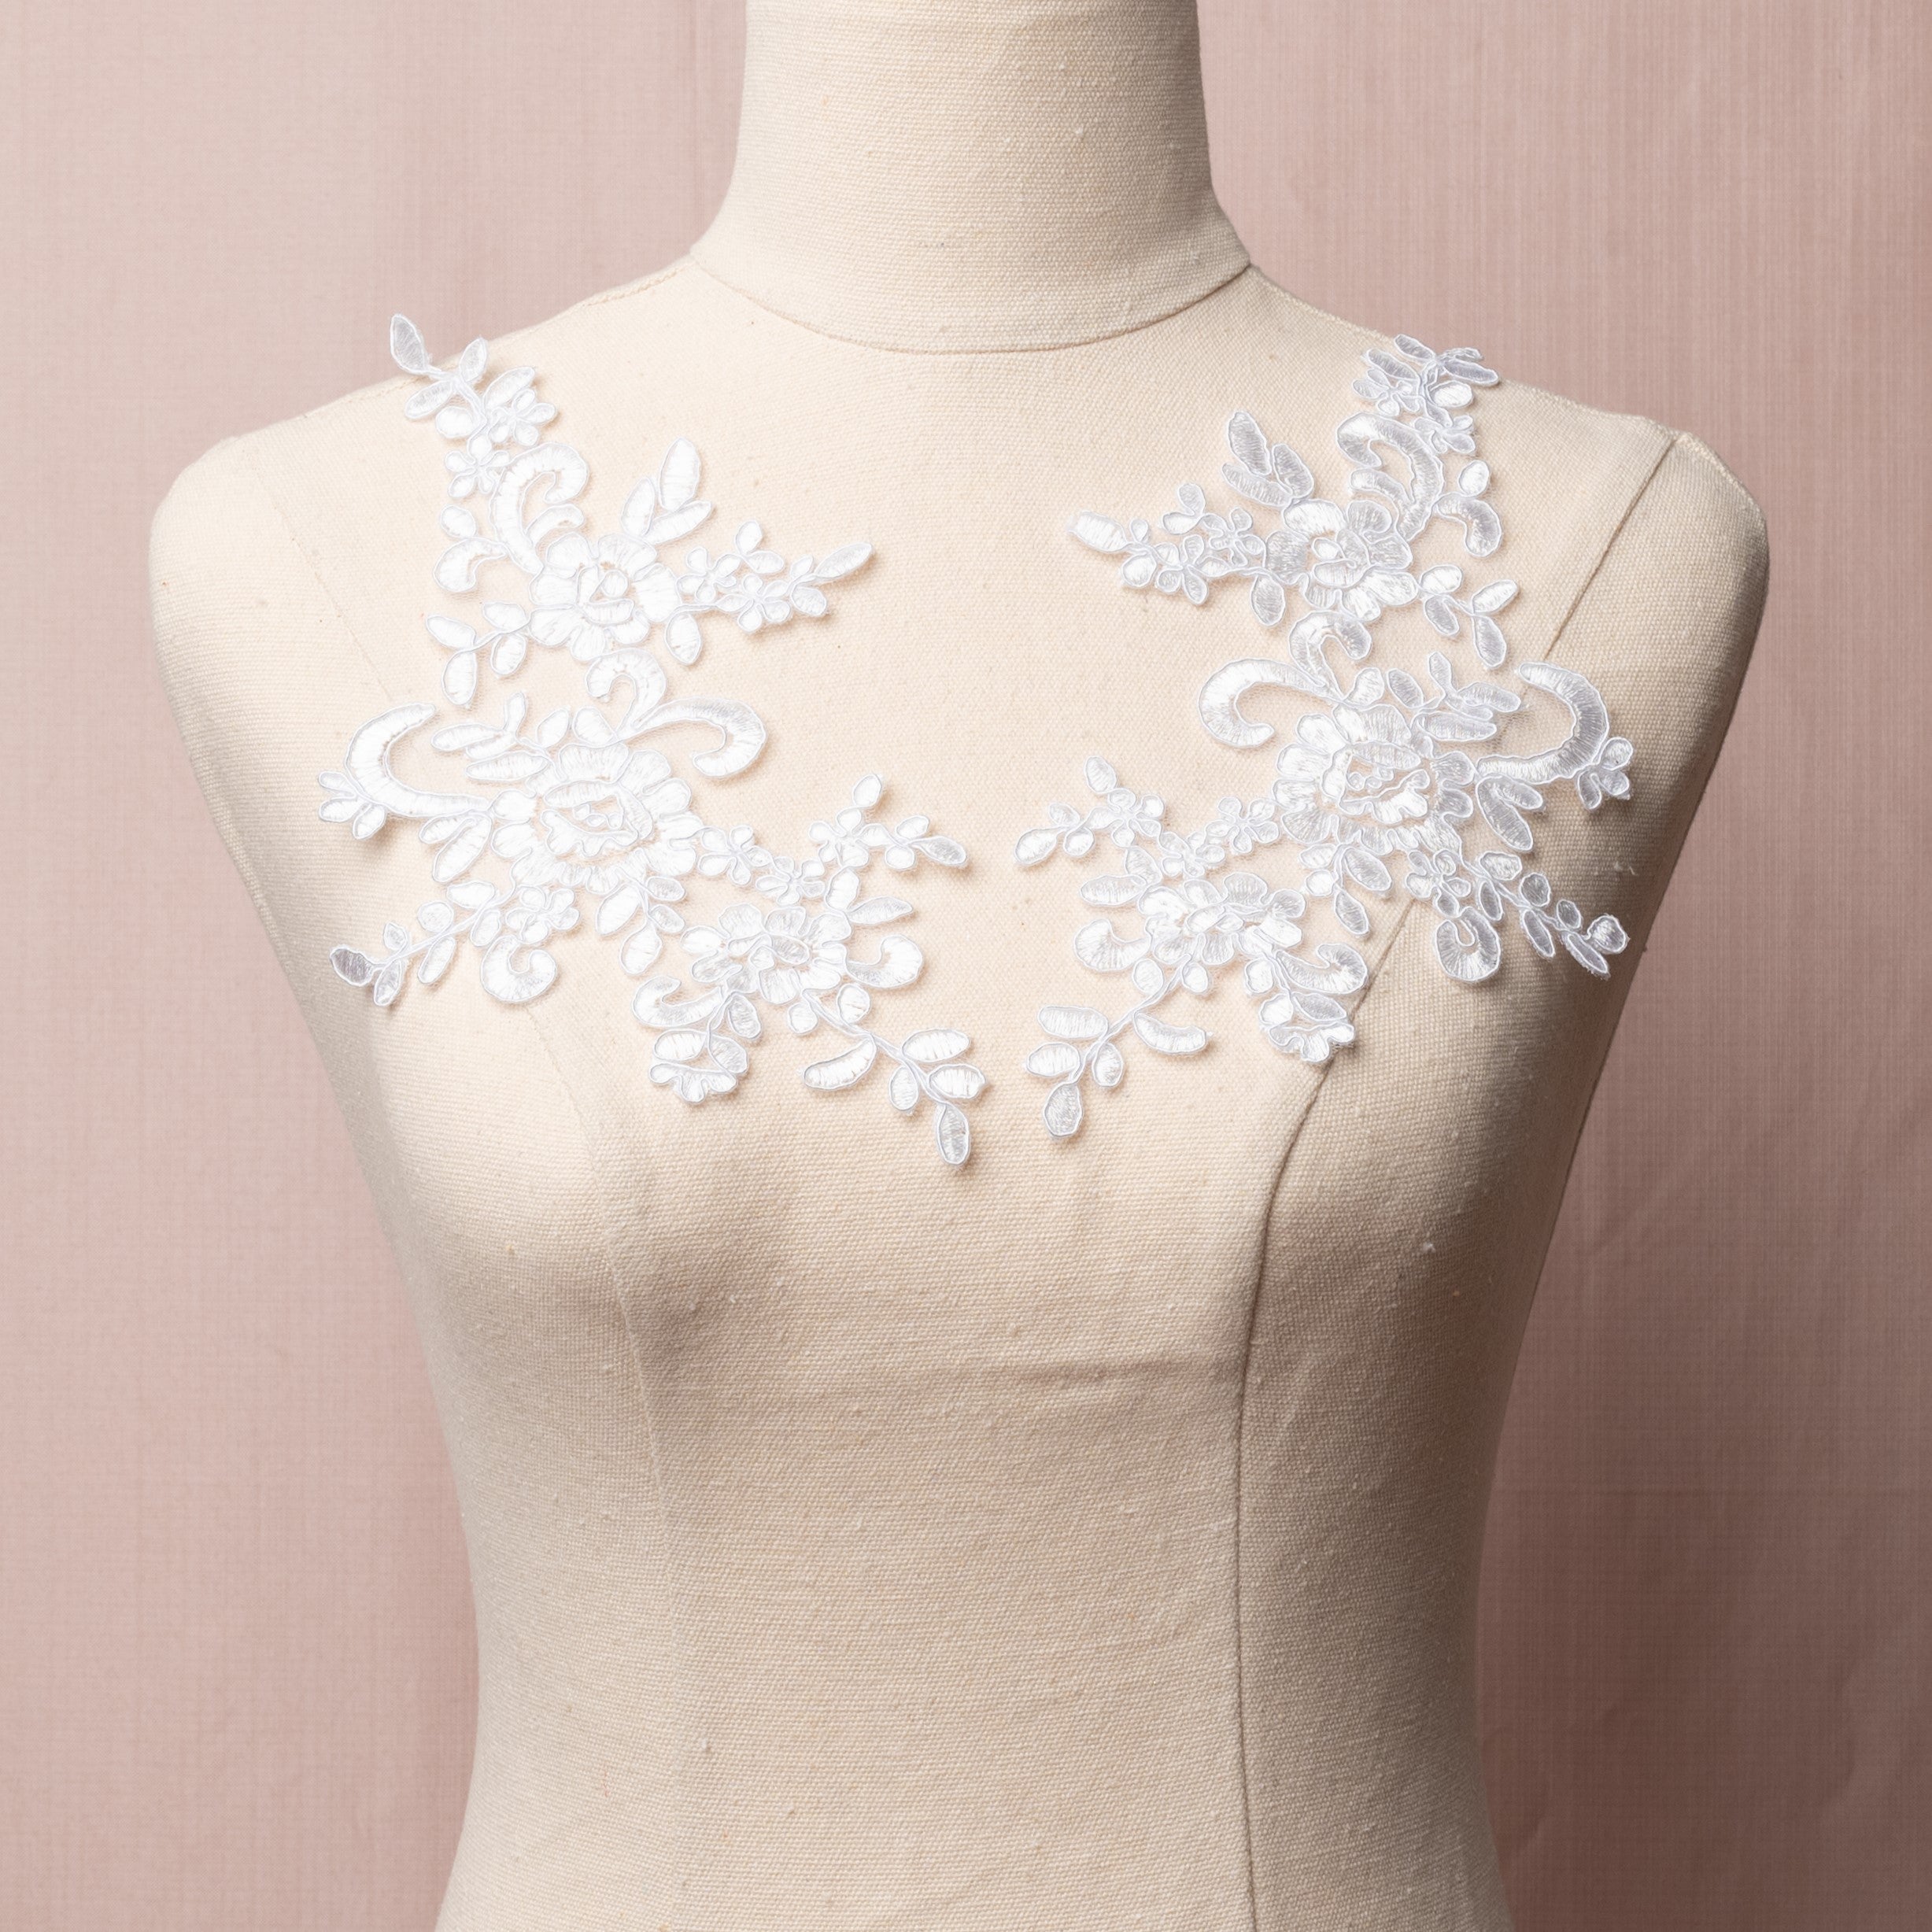 White embroidered and corded applique pair with a floral design.  The appliques are displayed on a mannequin.